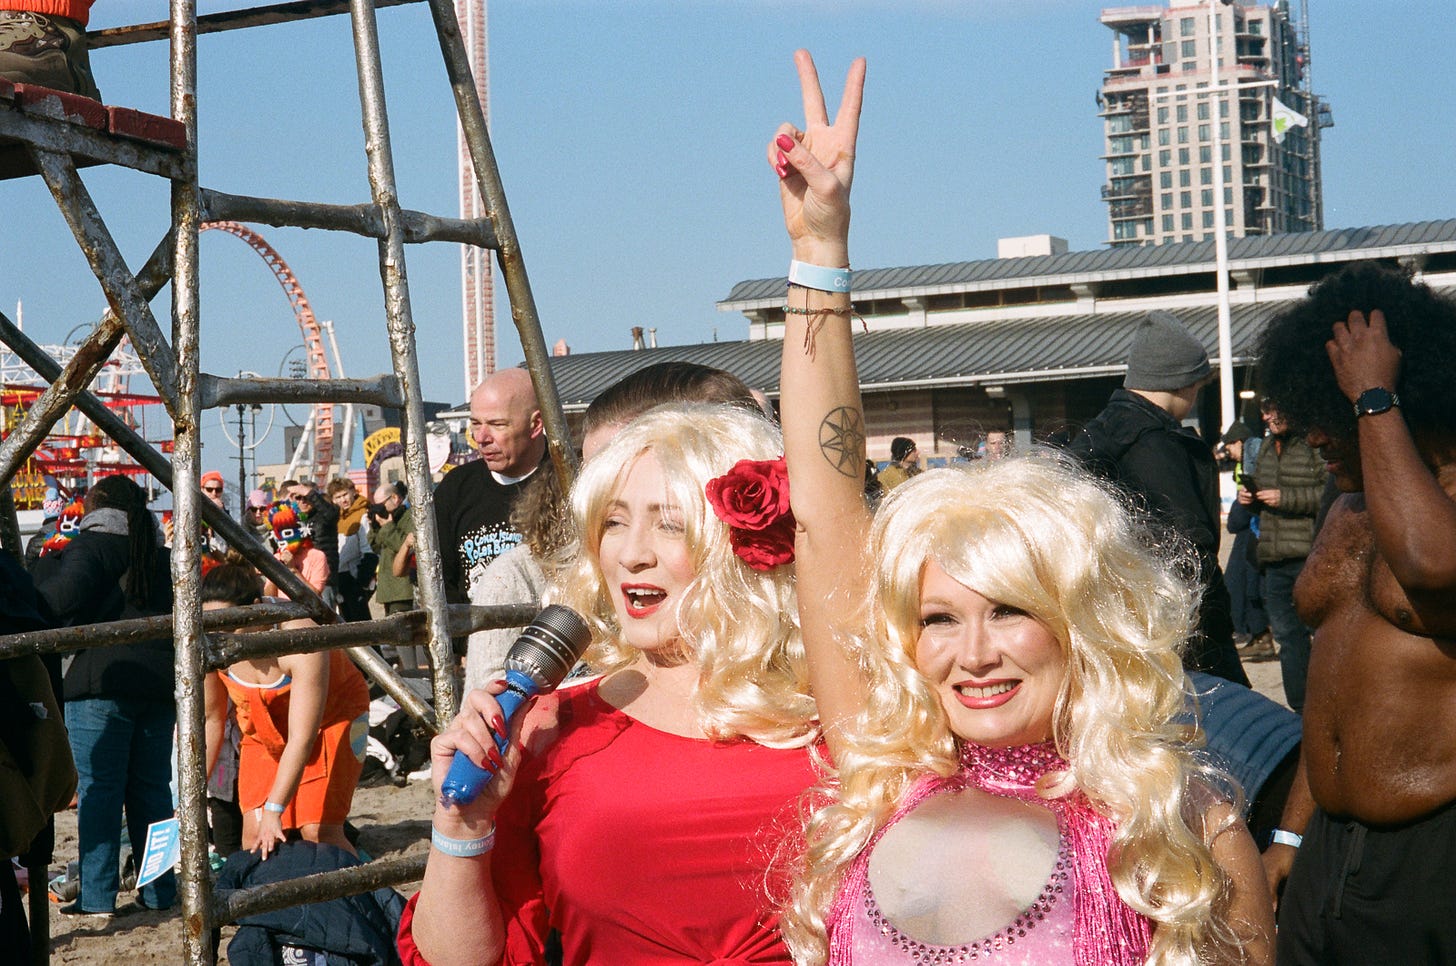 35mm film photo of two women posing as Dolly Parton